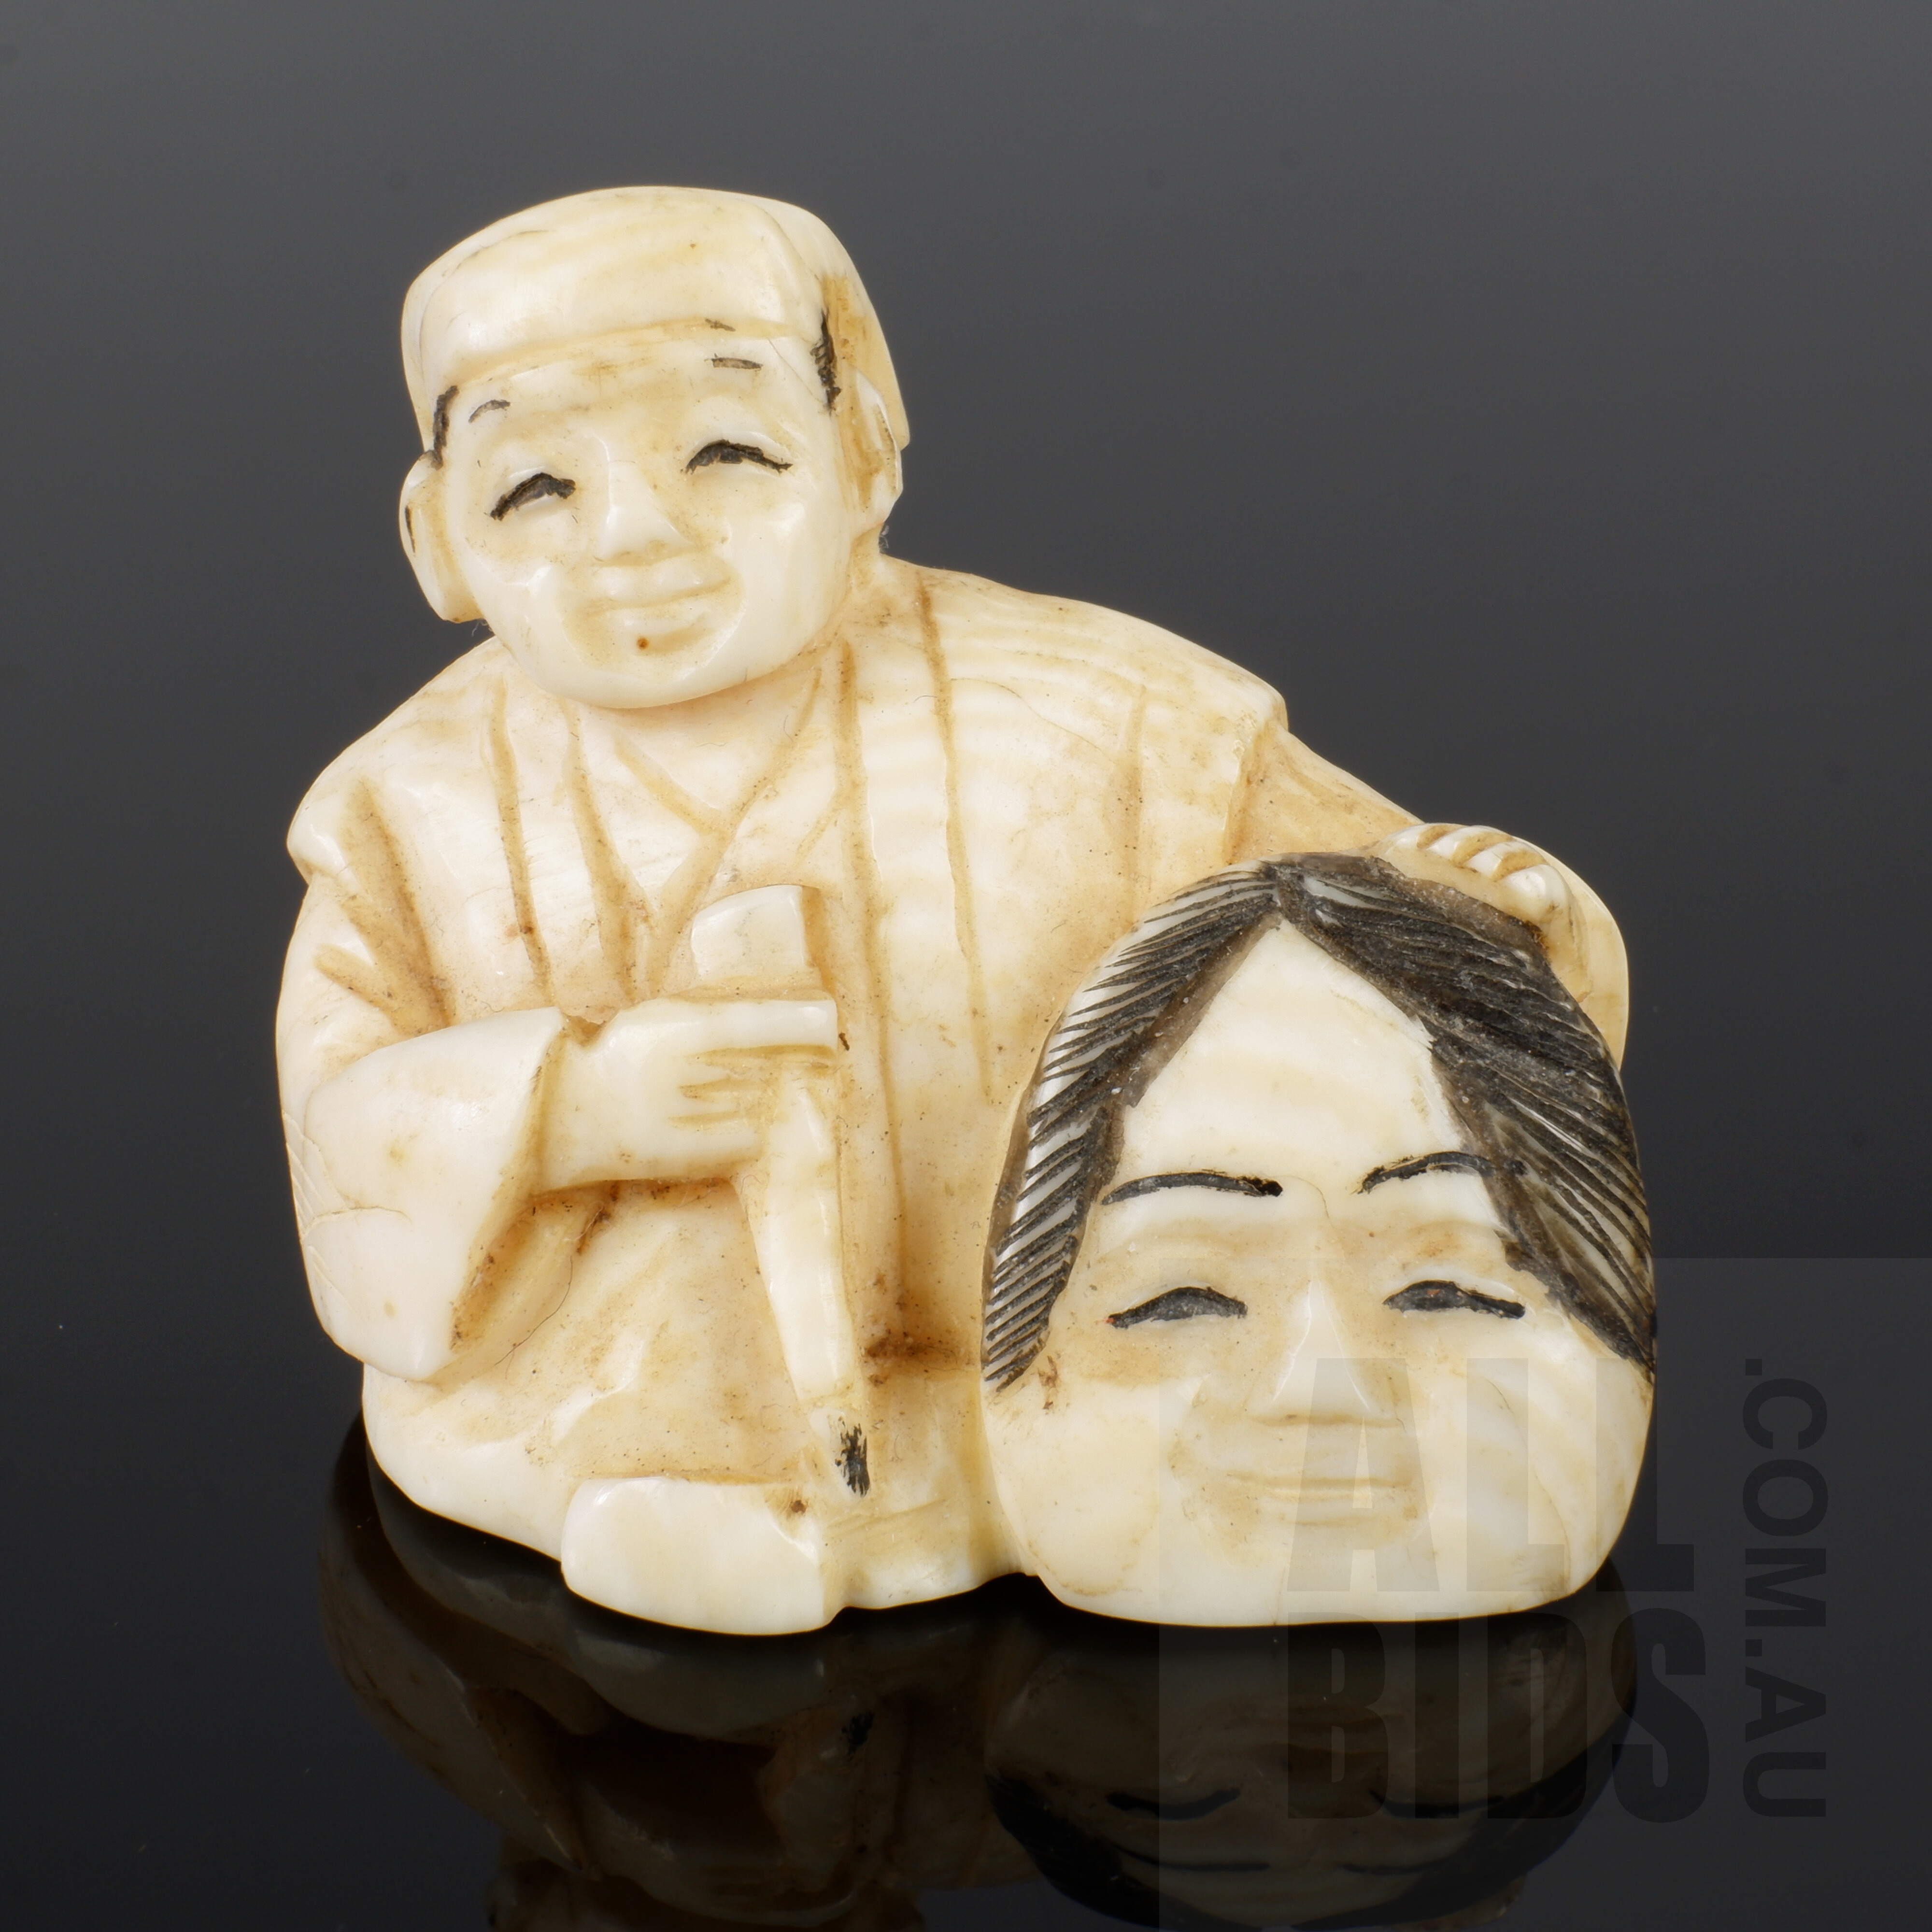 'Antique Japanese Carved and Stained Ivory Netsuke, Meiji Period 1868-1912'